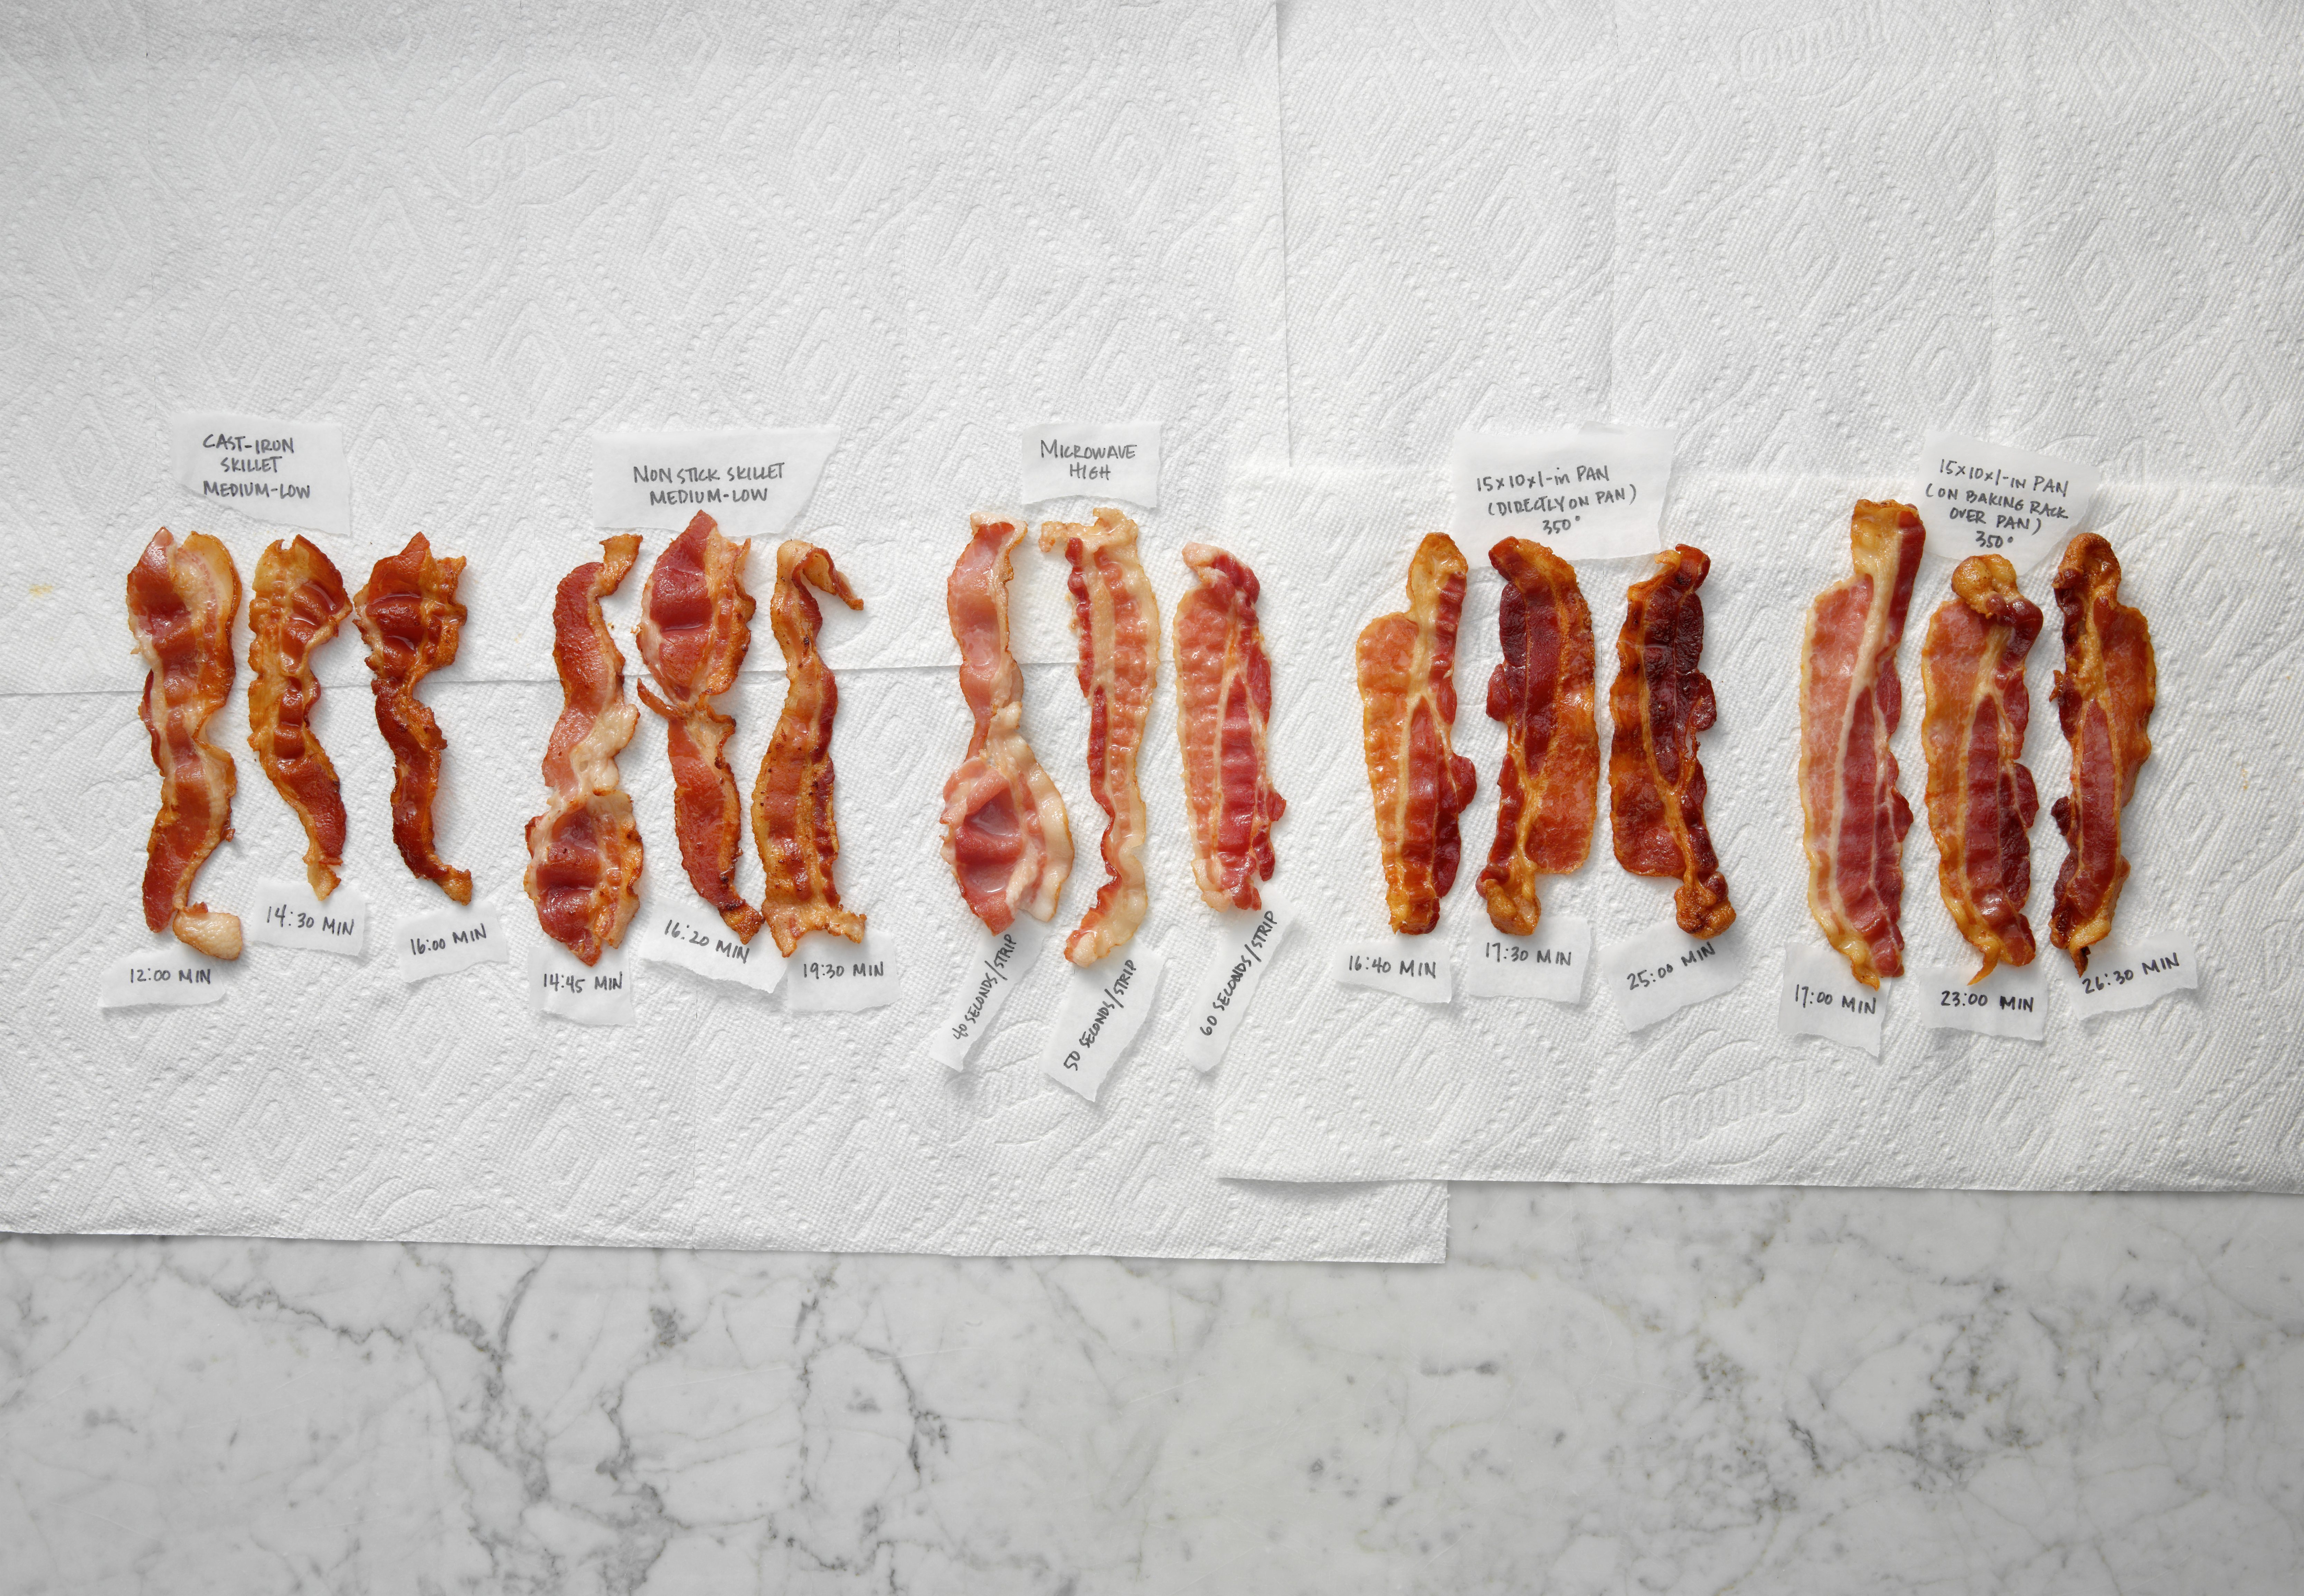 The Best Ways To Cook Bacon